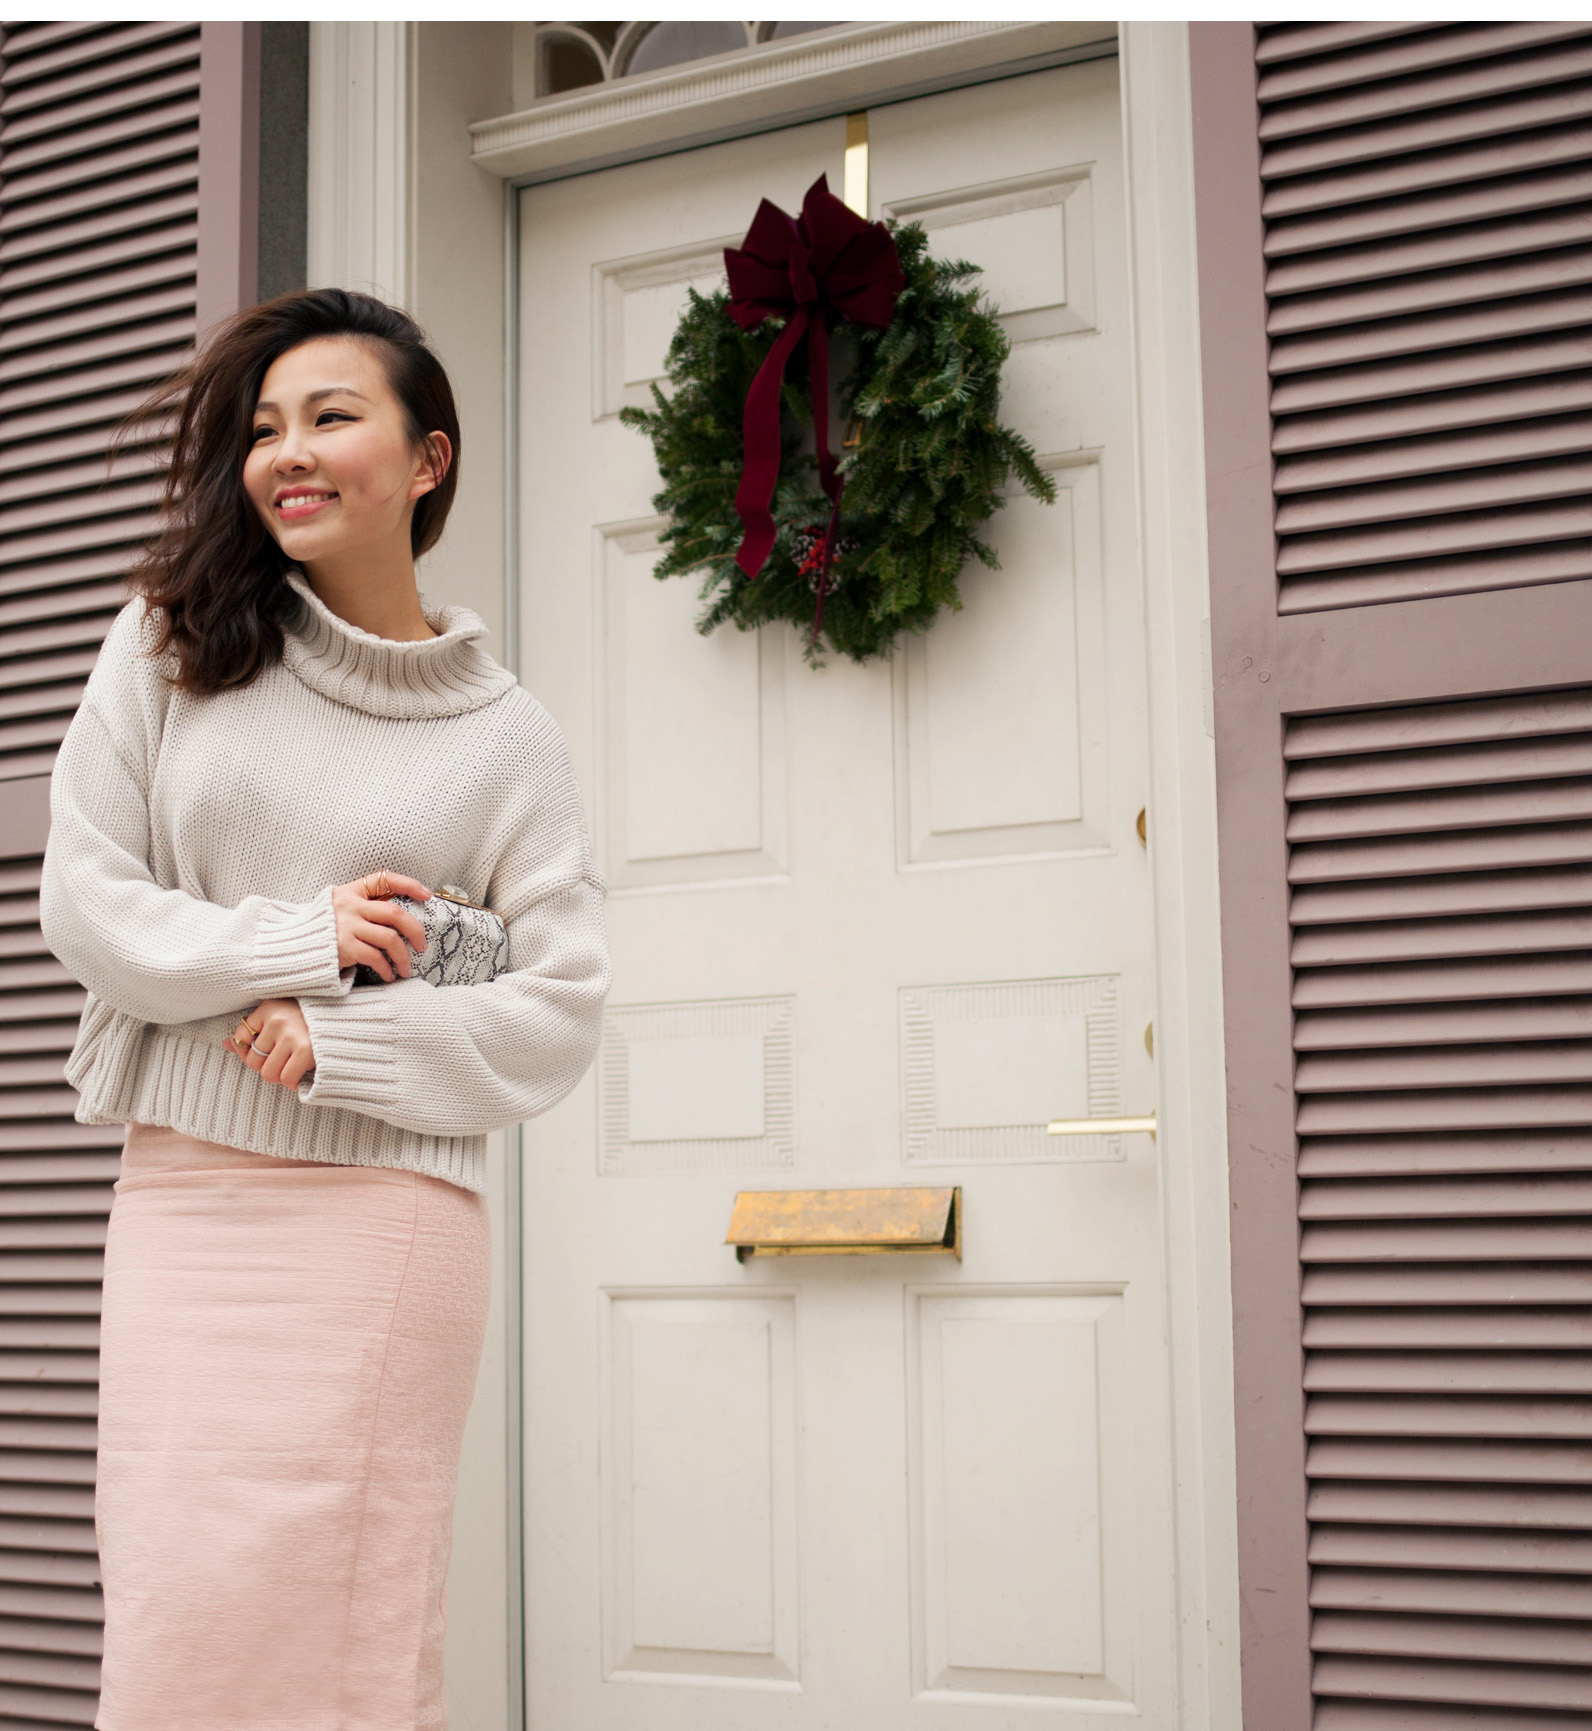 pink pencial skirt and sweater.jpg